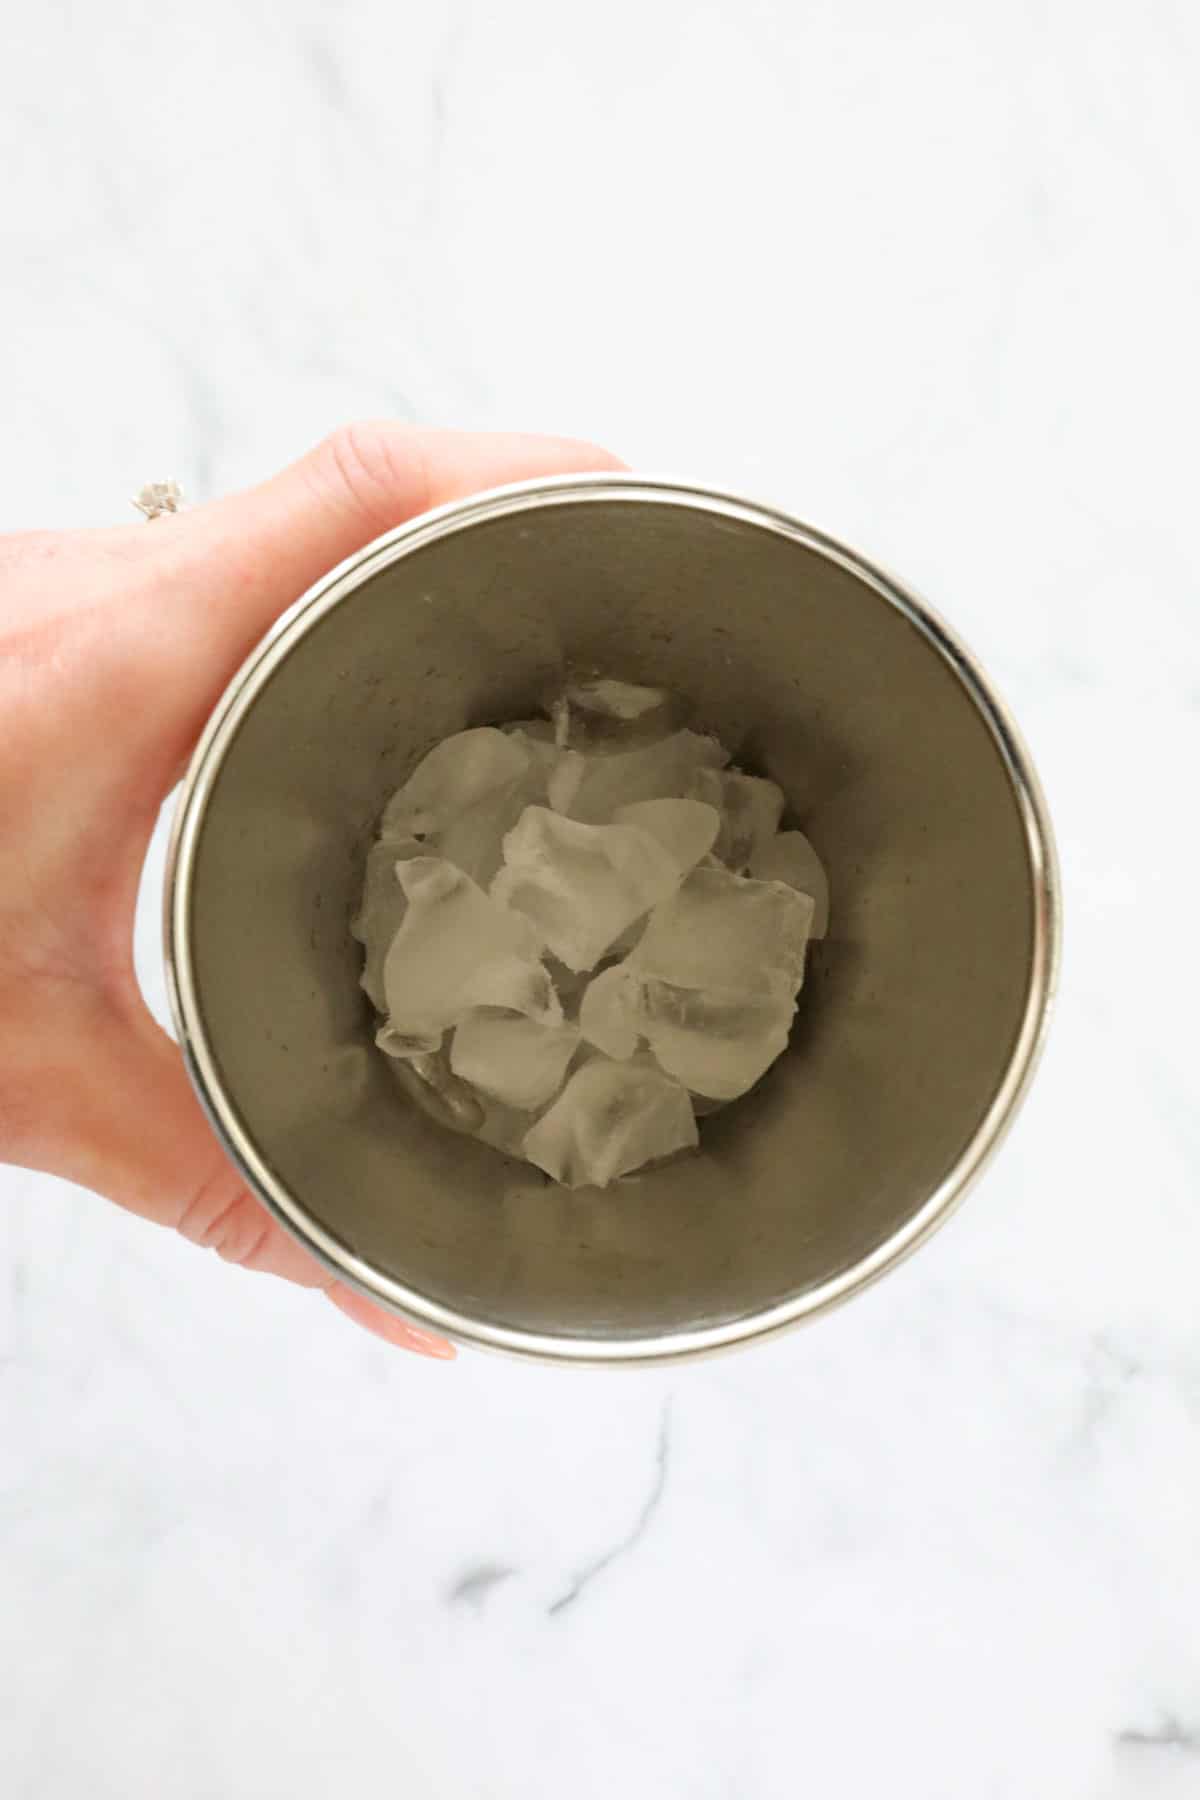 Ice cubes in a metal shaker.